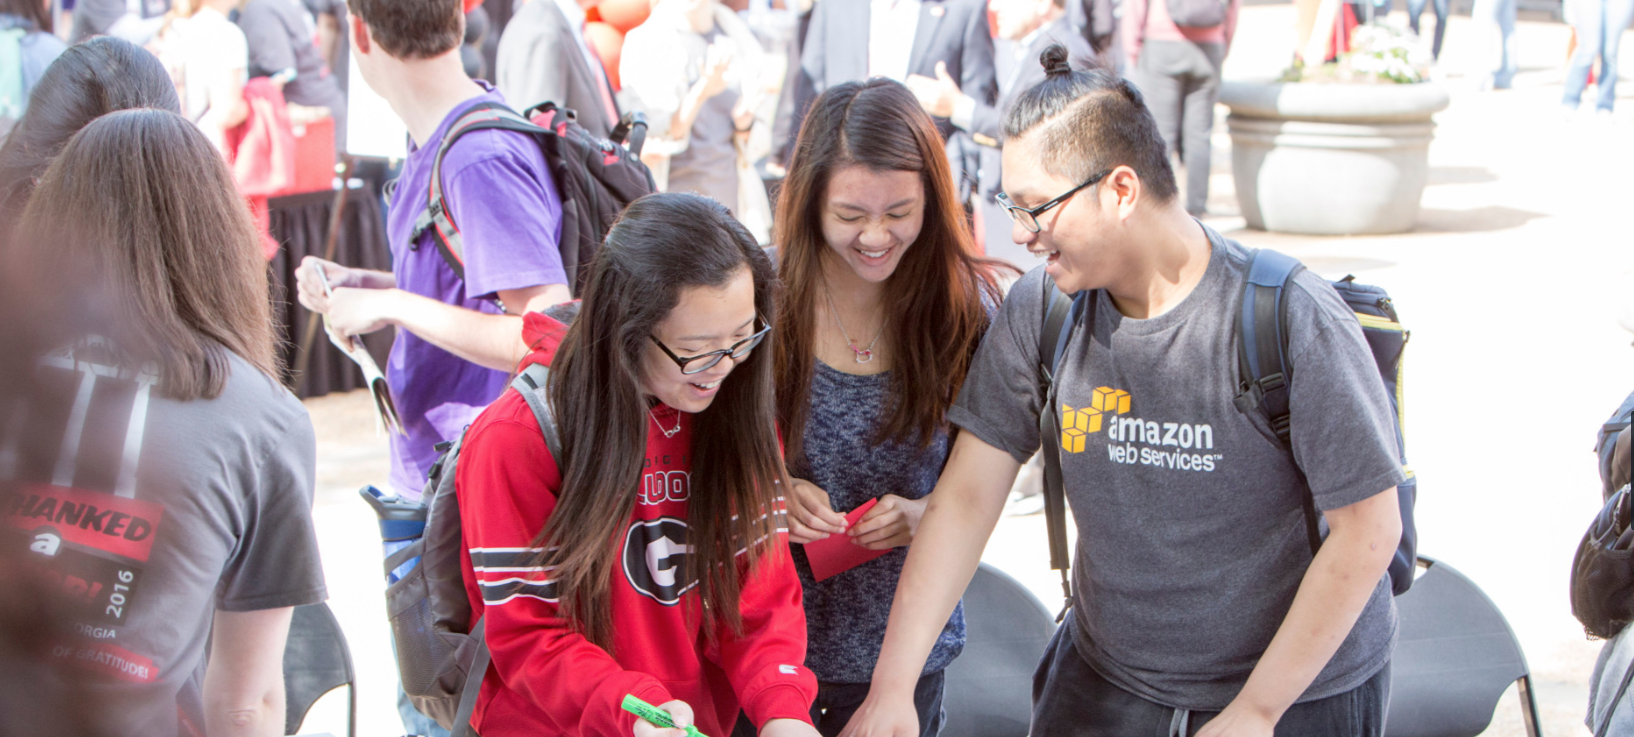 Minh Hoang, a freshman mathematics major from Vietnam and two other students, make a sign for a photo op on Donor Day